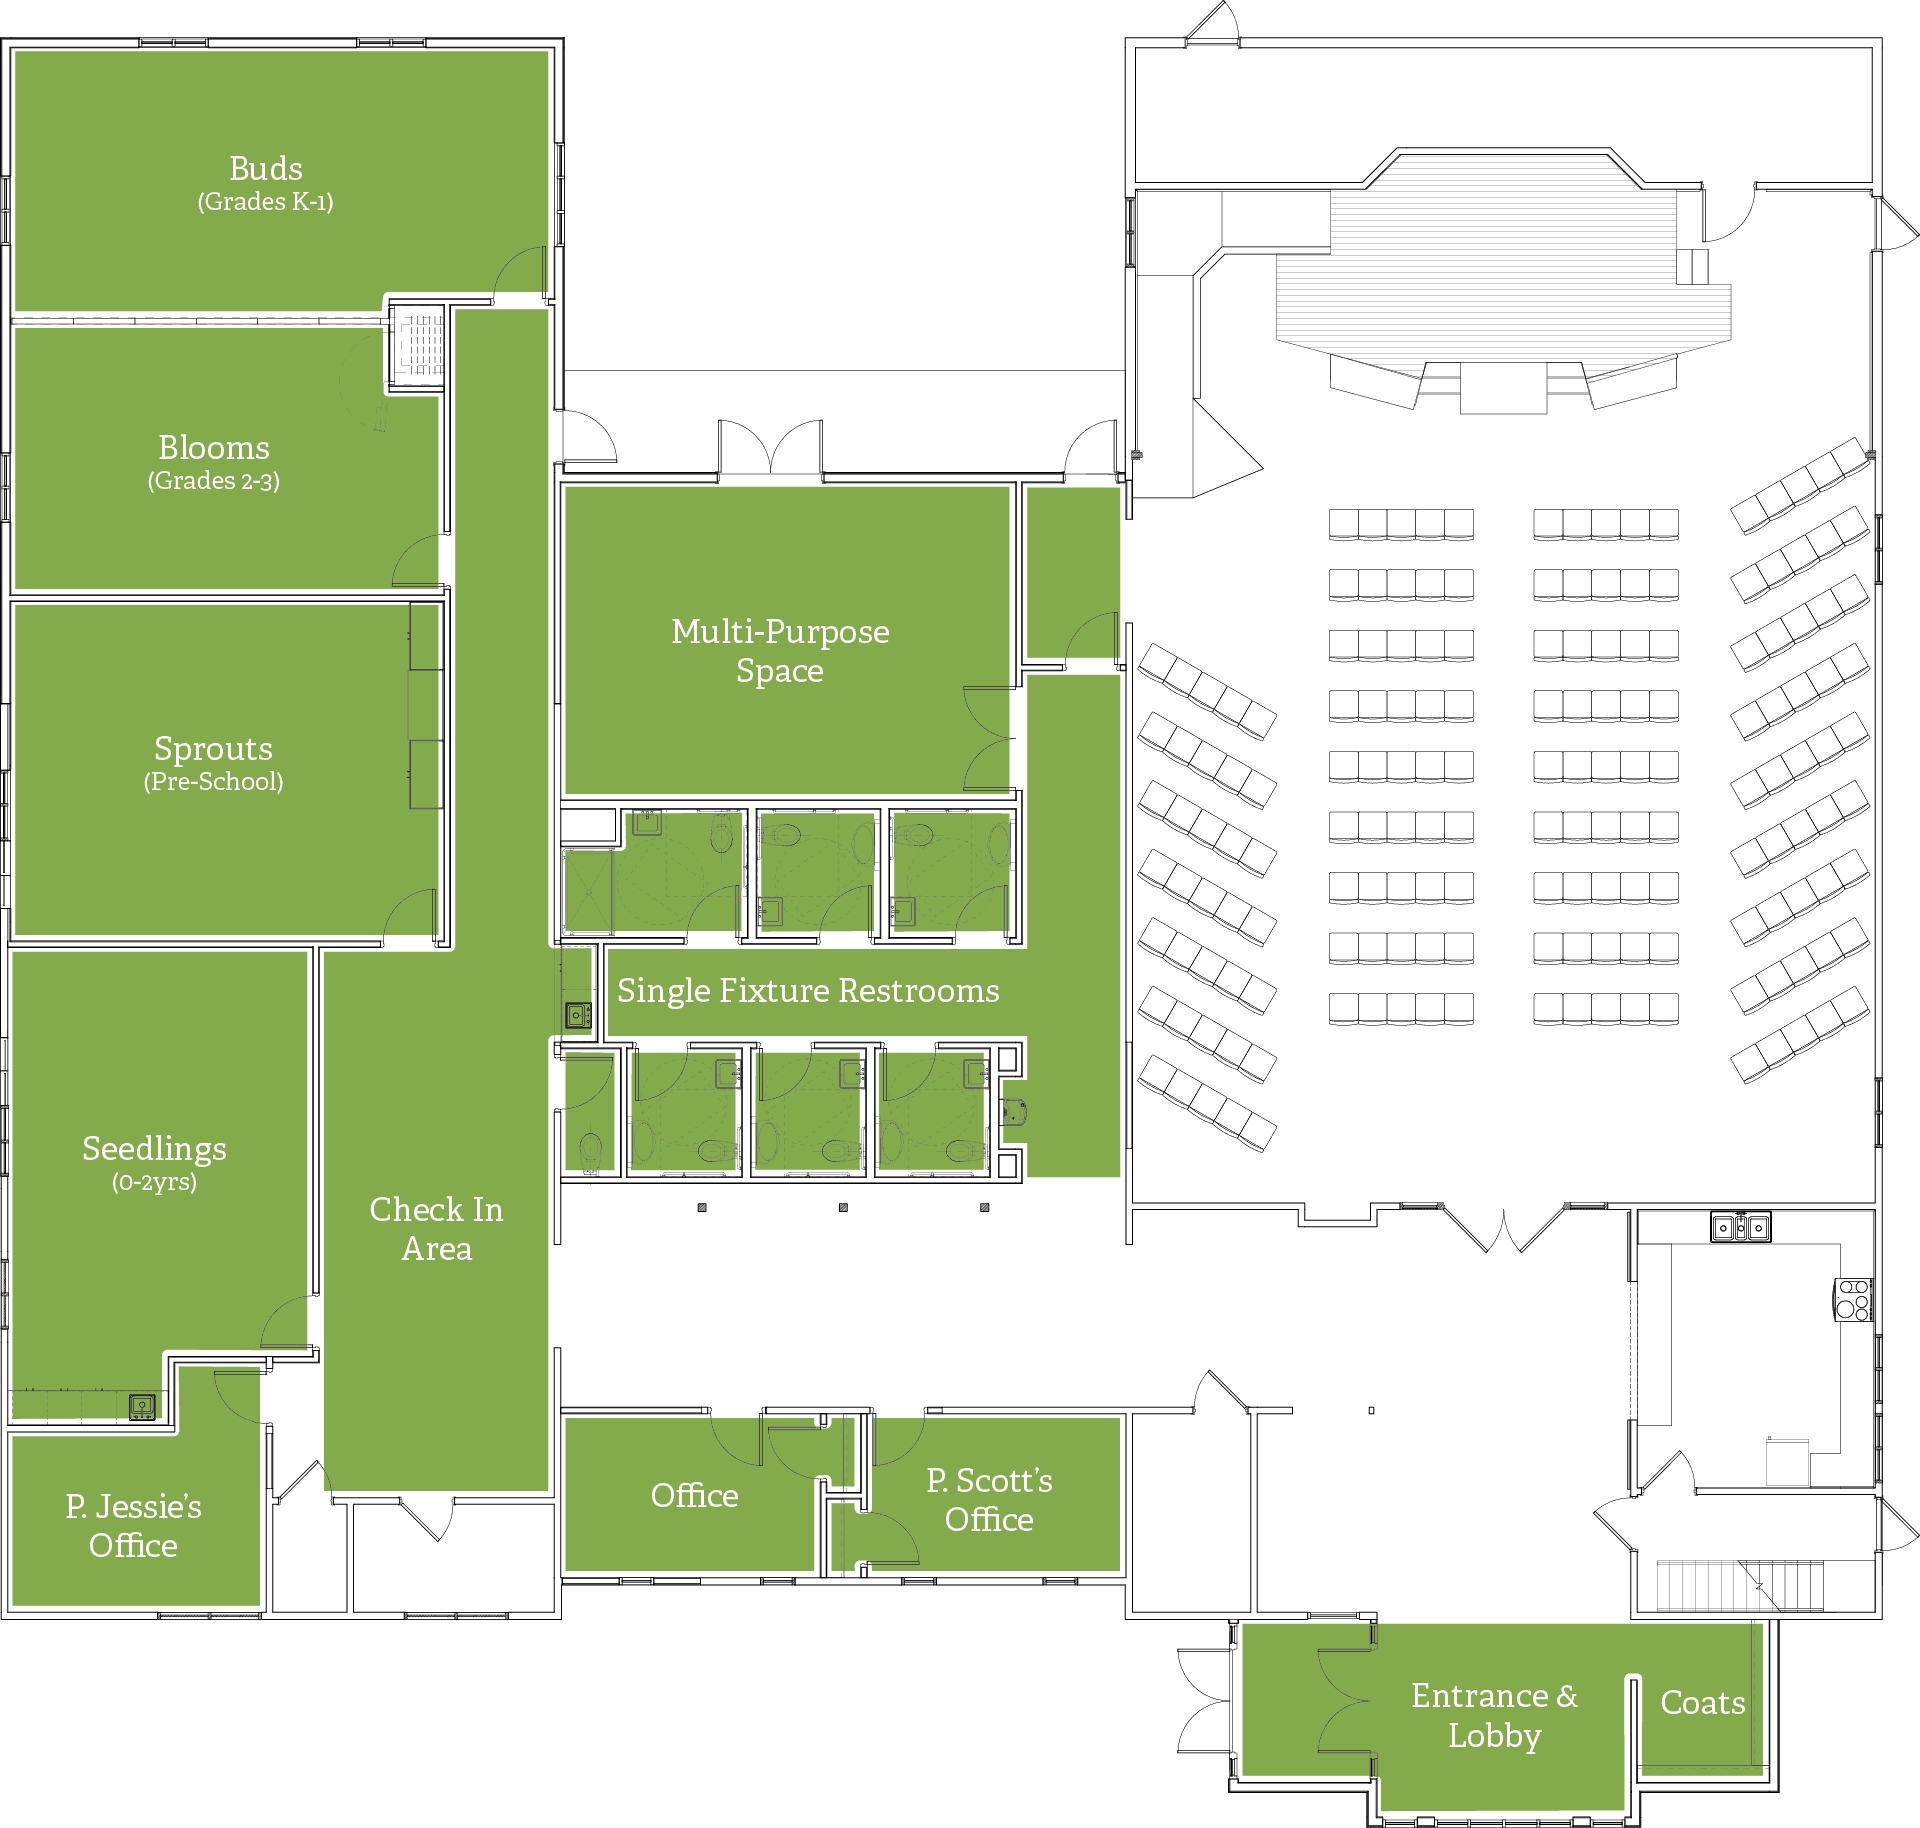 Diagram of a plan for expanding and renovating the Artisan Church building, showing the addition of three new classrooms (two on the left side of the building and one in what is currently the courtyard) and reconfiguration of existing space to create a total of 5 appropraitely-sized classrooms, a new office space for our children's pastor, and more accessible and inclusive restrooms.